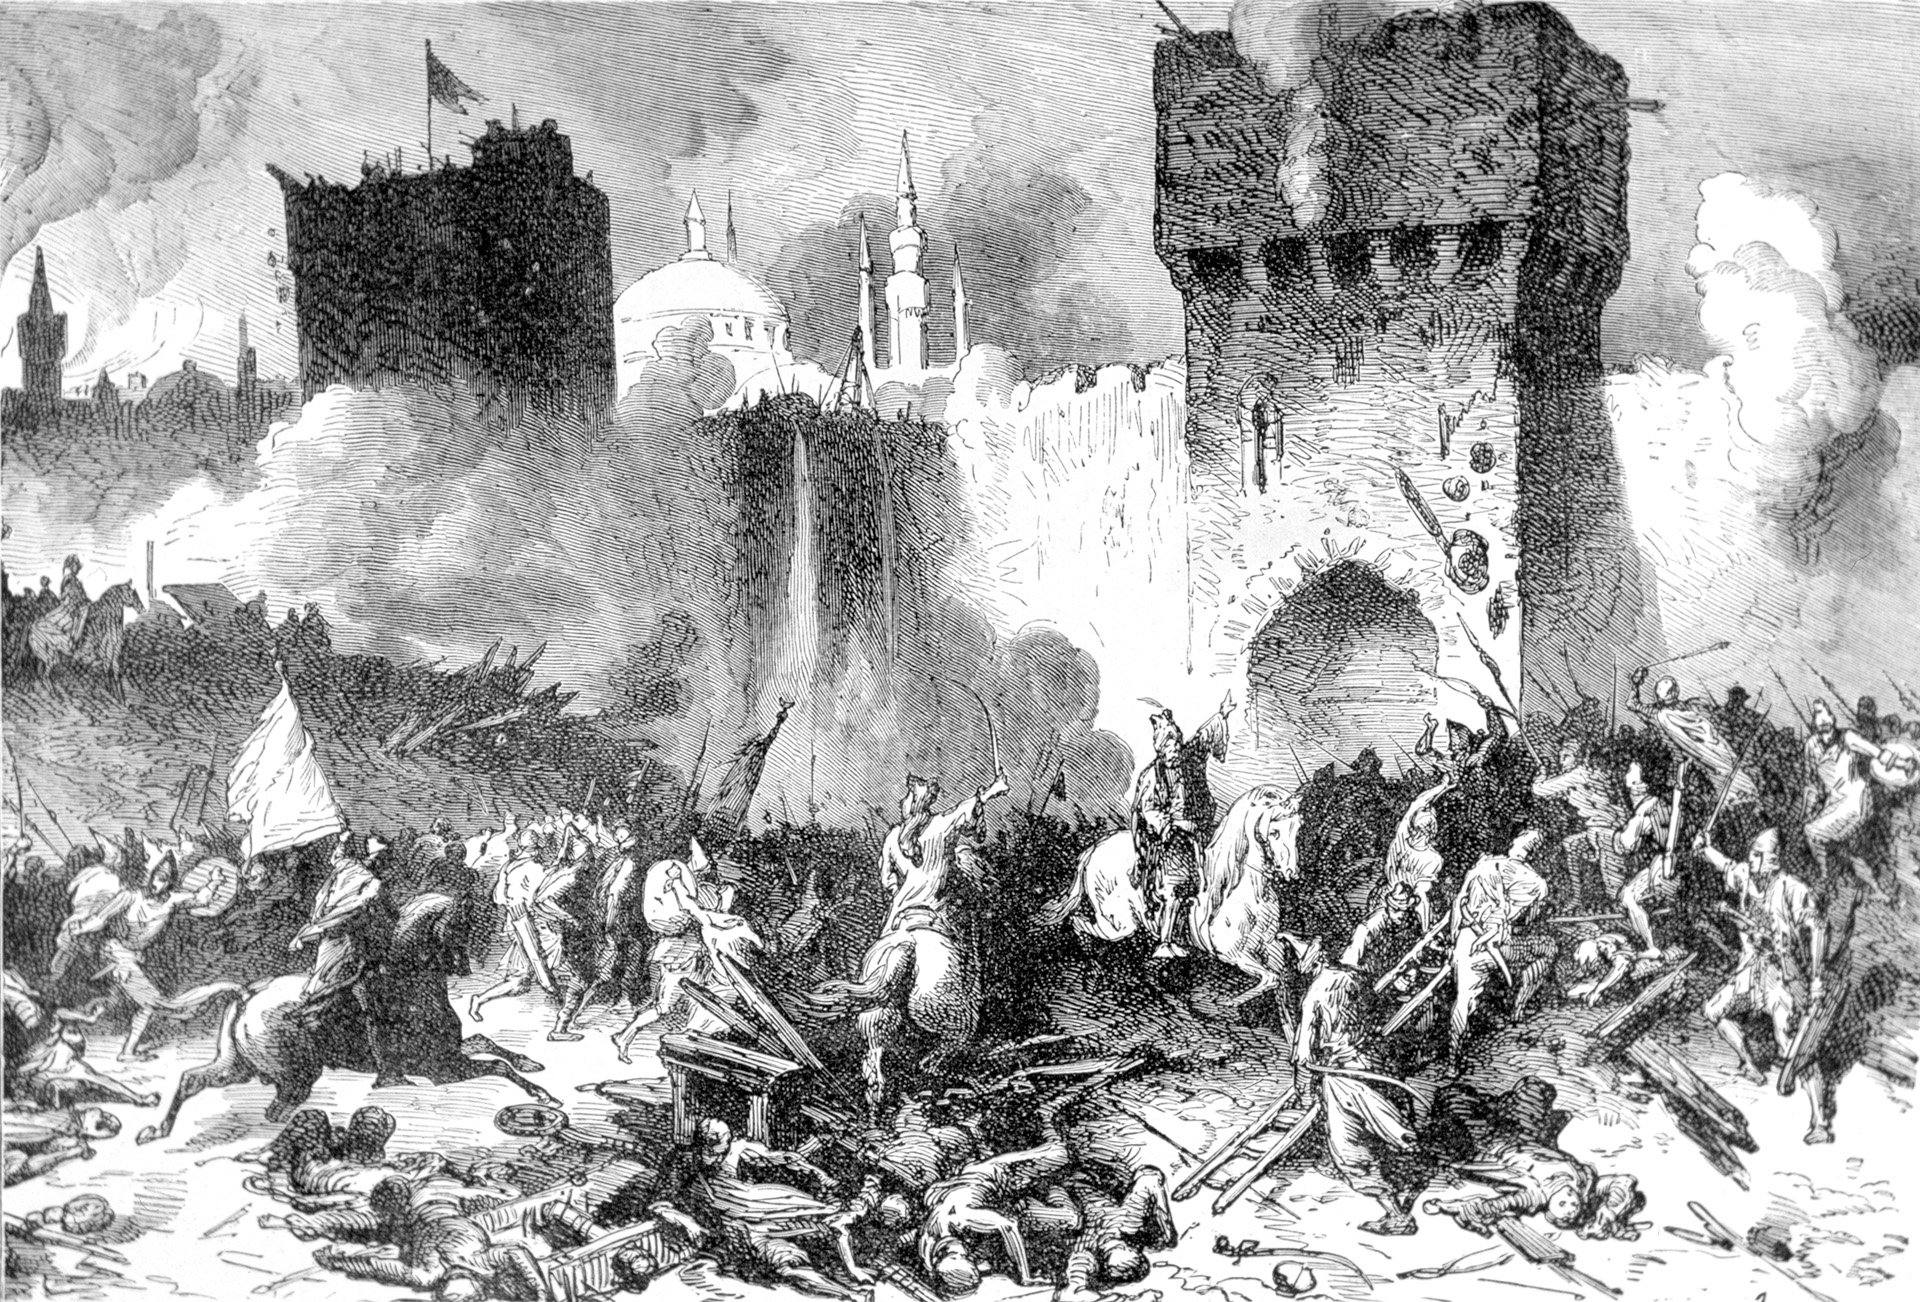 The Ottoman army, including its formidable contingent of Janissaries, storms the walls in what was to be their final assault. But breaching the walls was not to be last of the fighting. 